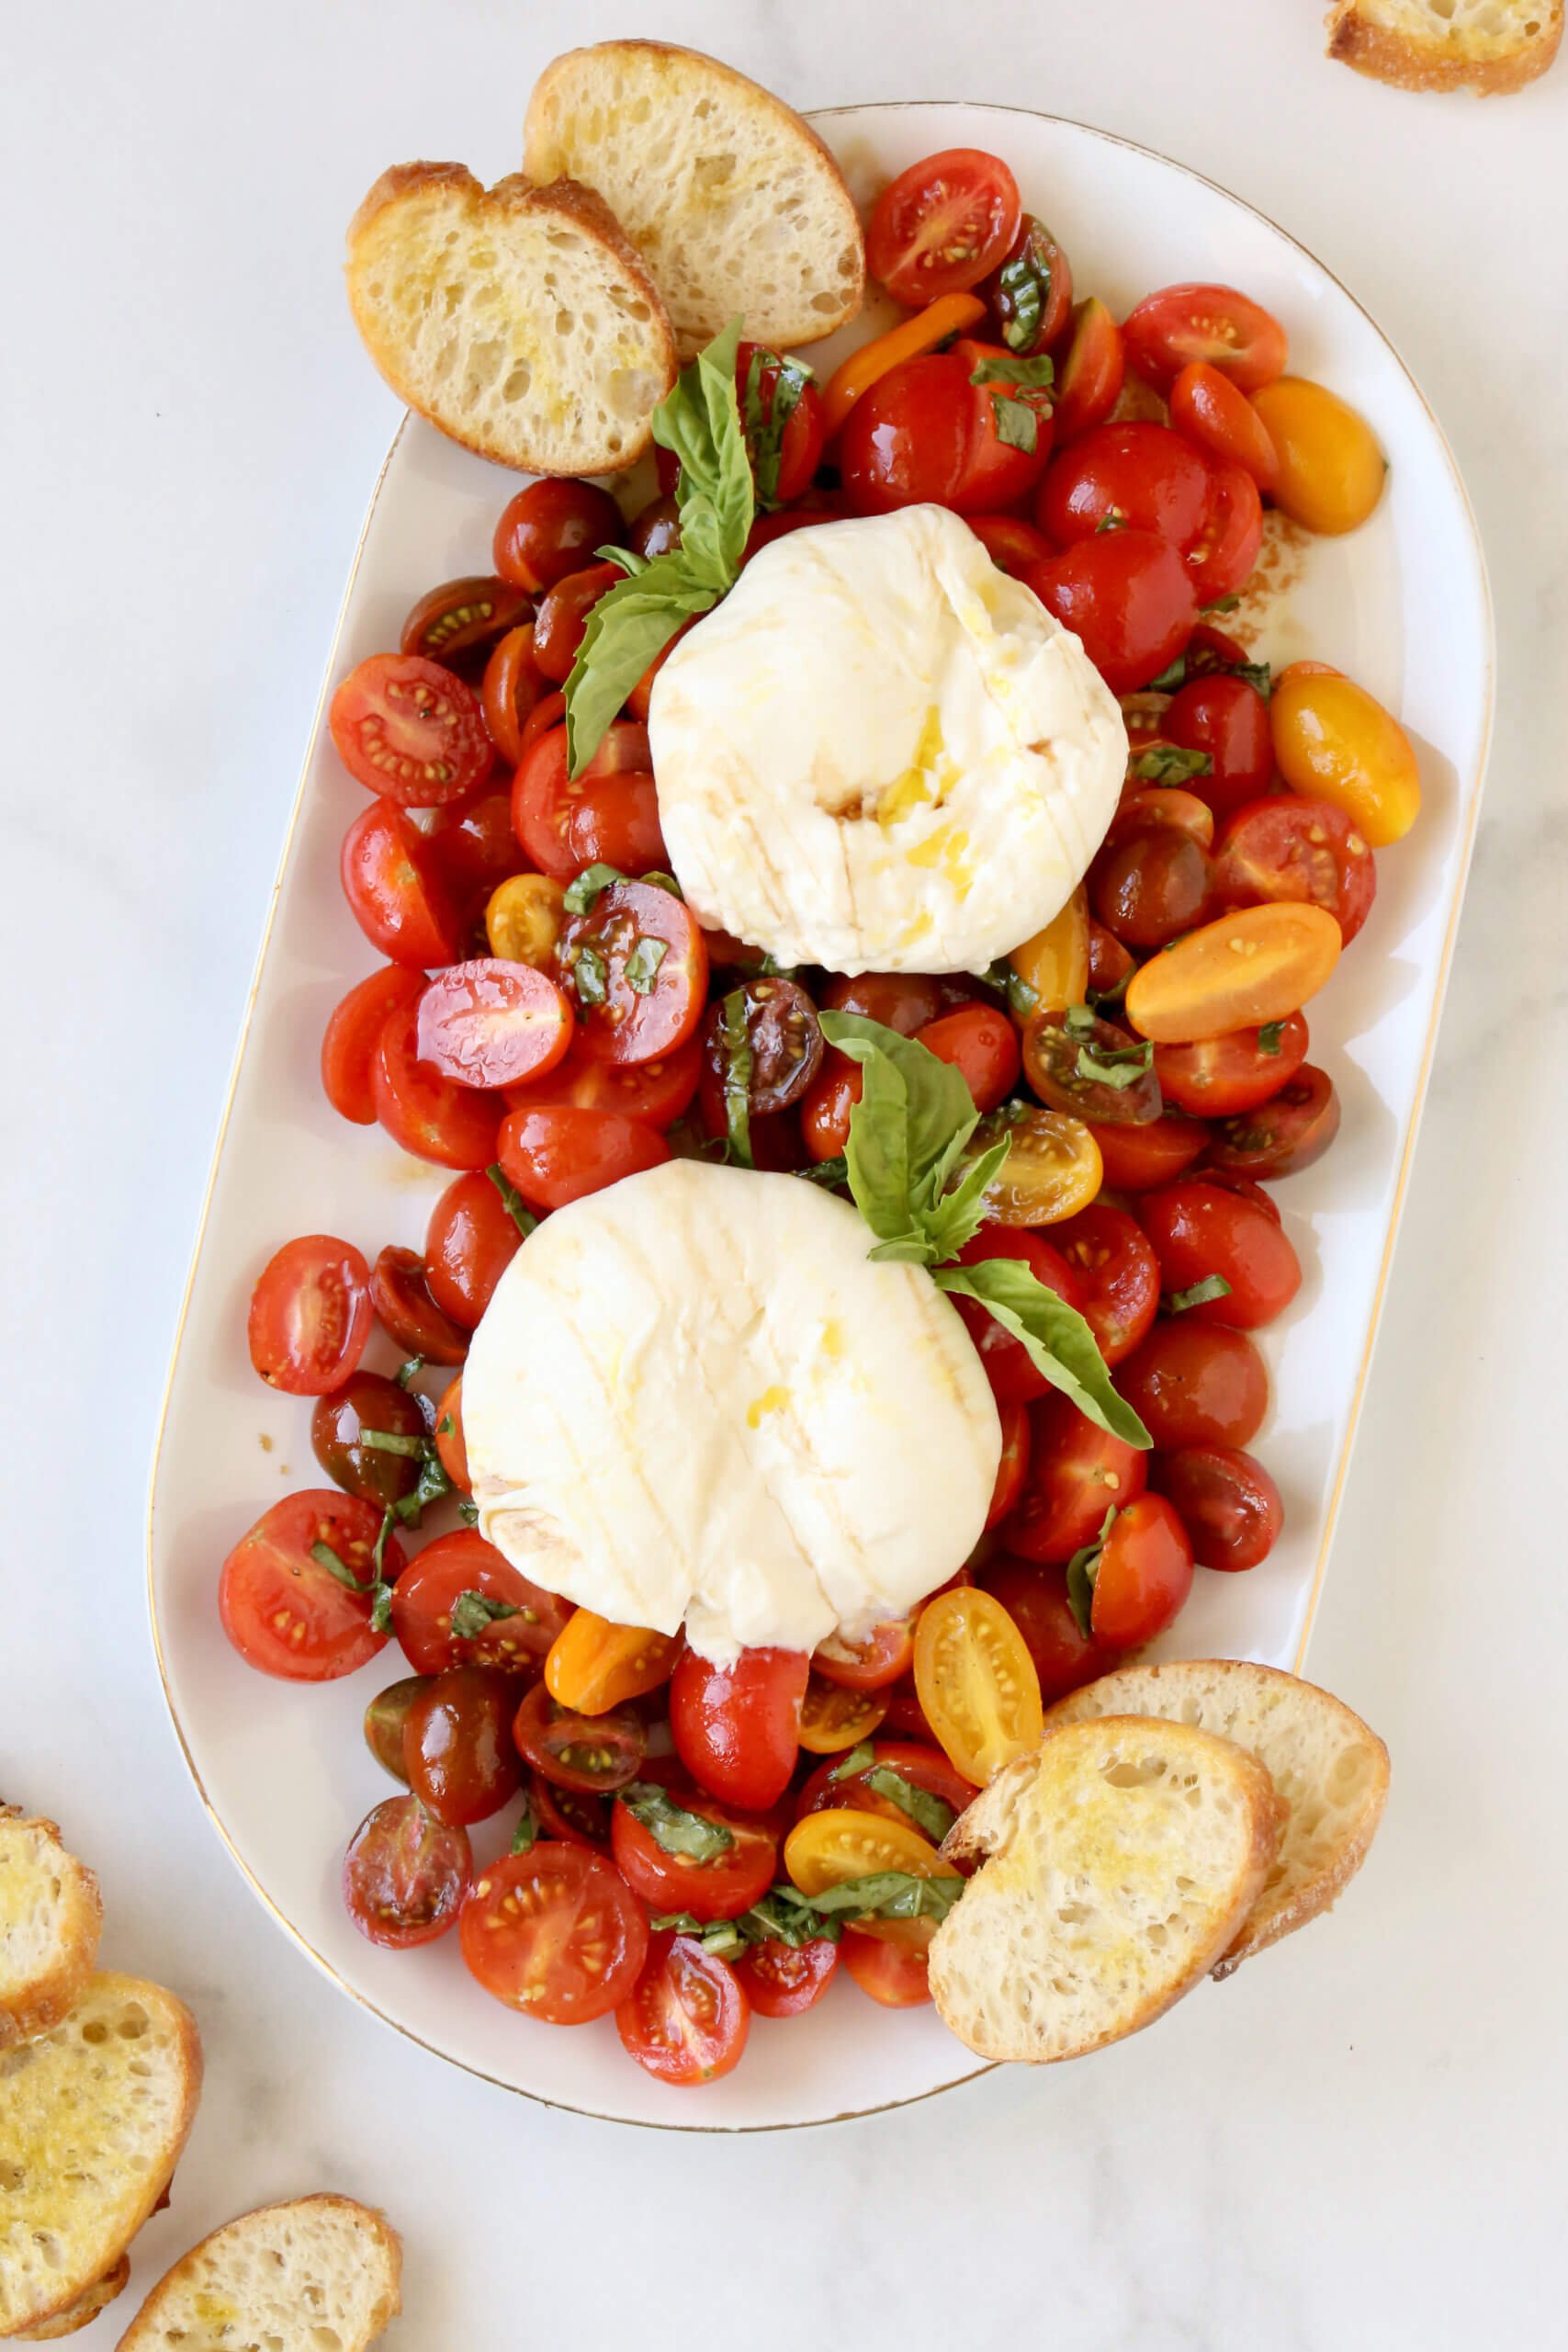 A white oval dish filled with sliced tomatoes, white cheese balls, basil and slices of toasted bread.  